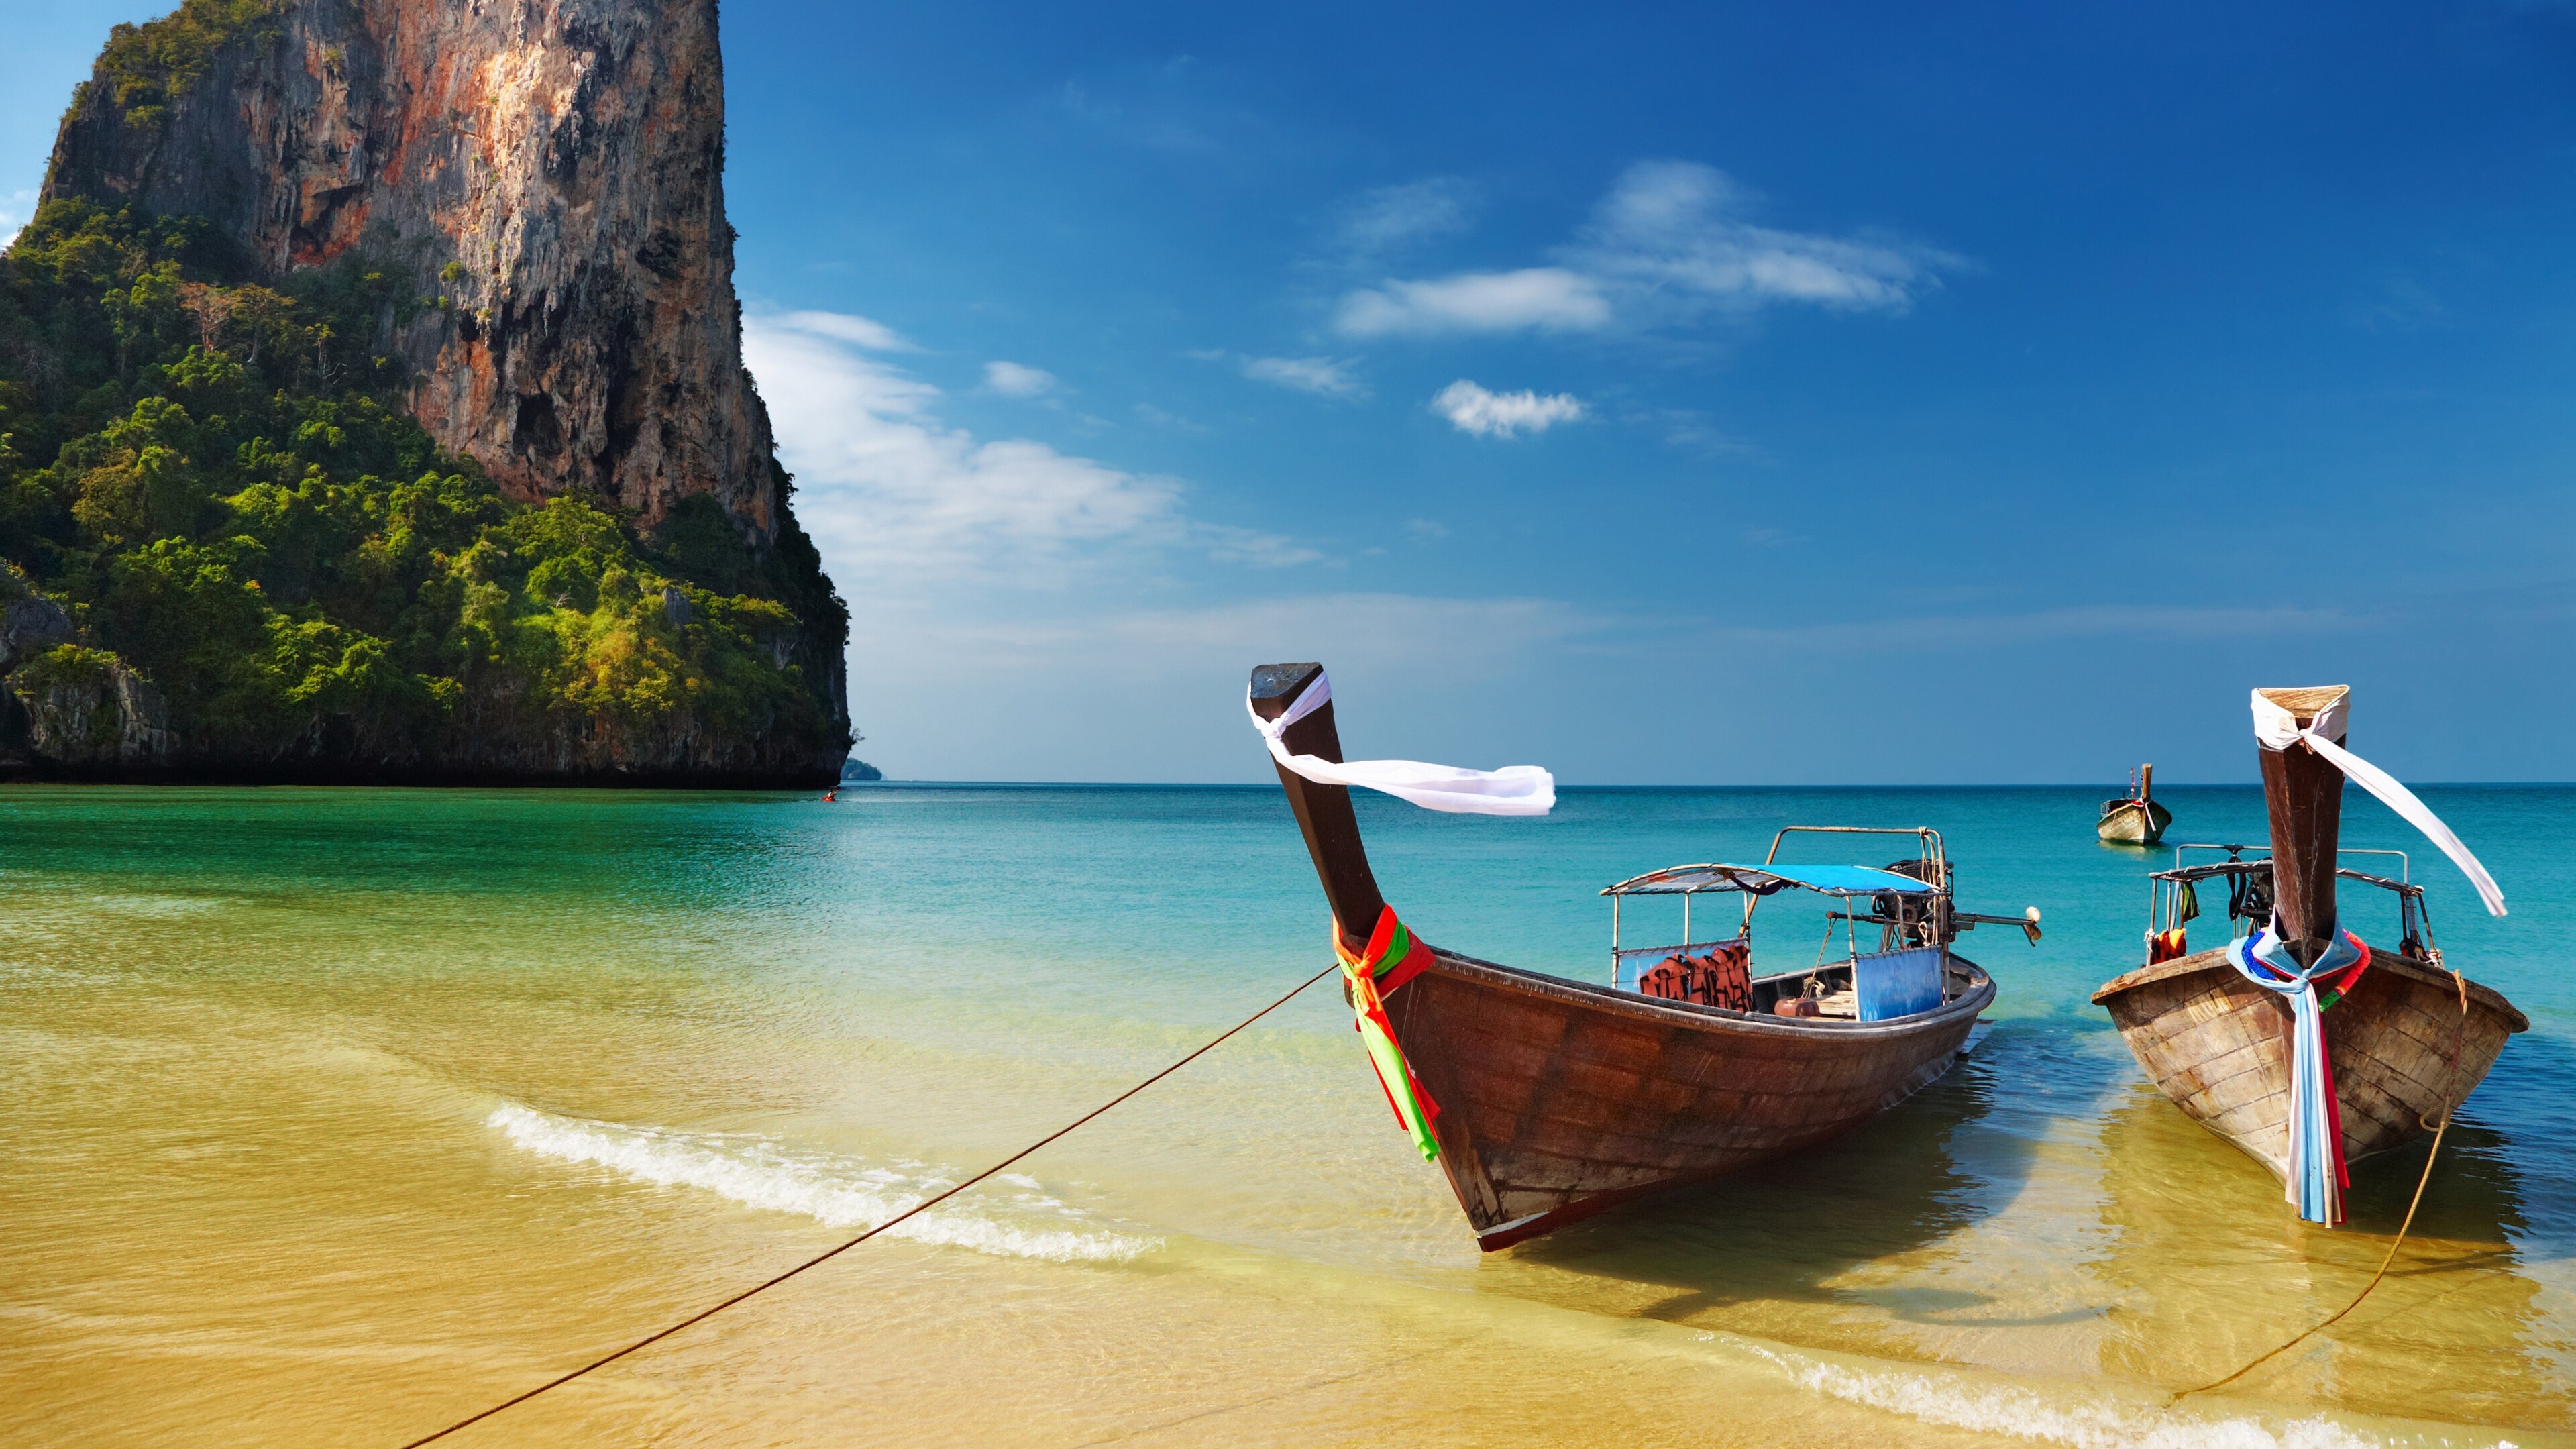 Phi Phi: Home to great snorkeling sites and picturesque beaches and lagoons, Koh Phi Phi Leh. 3840x2160 4K Wallpaper.